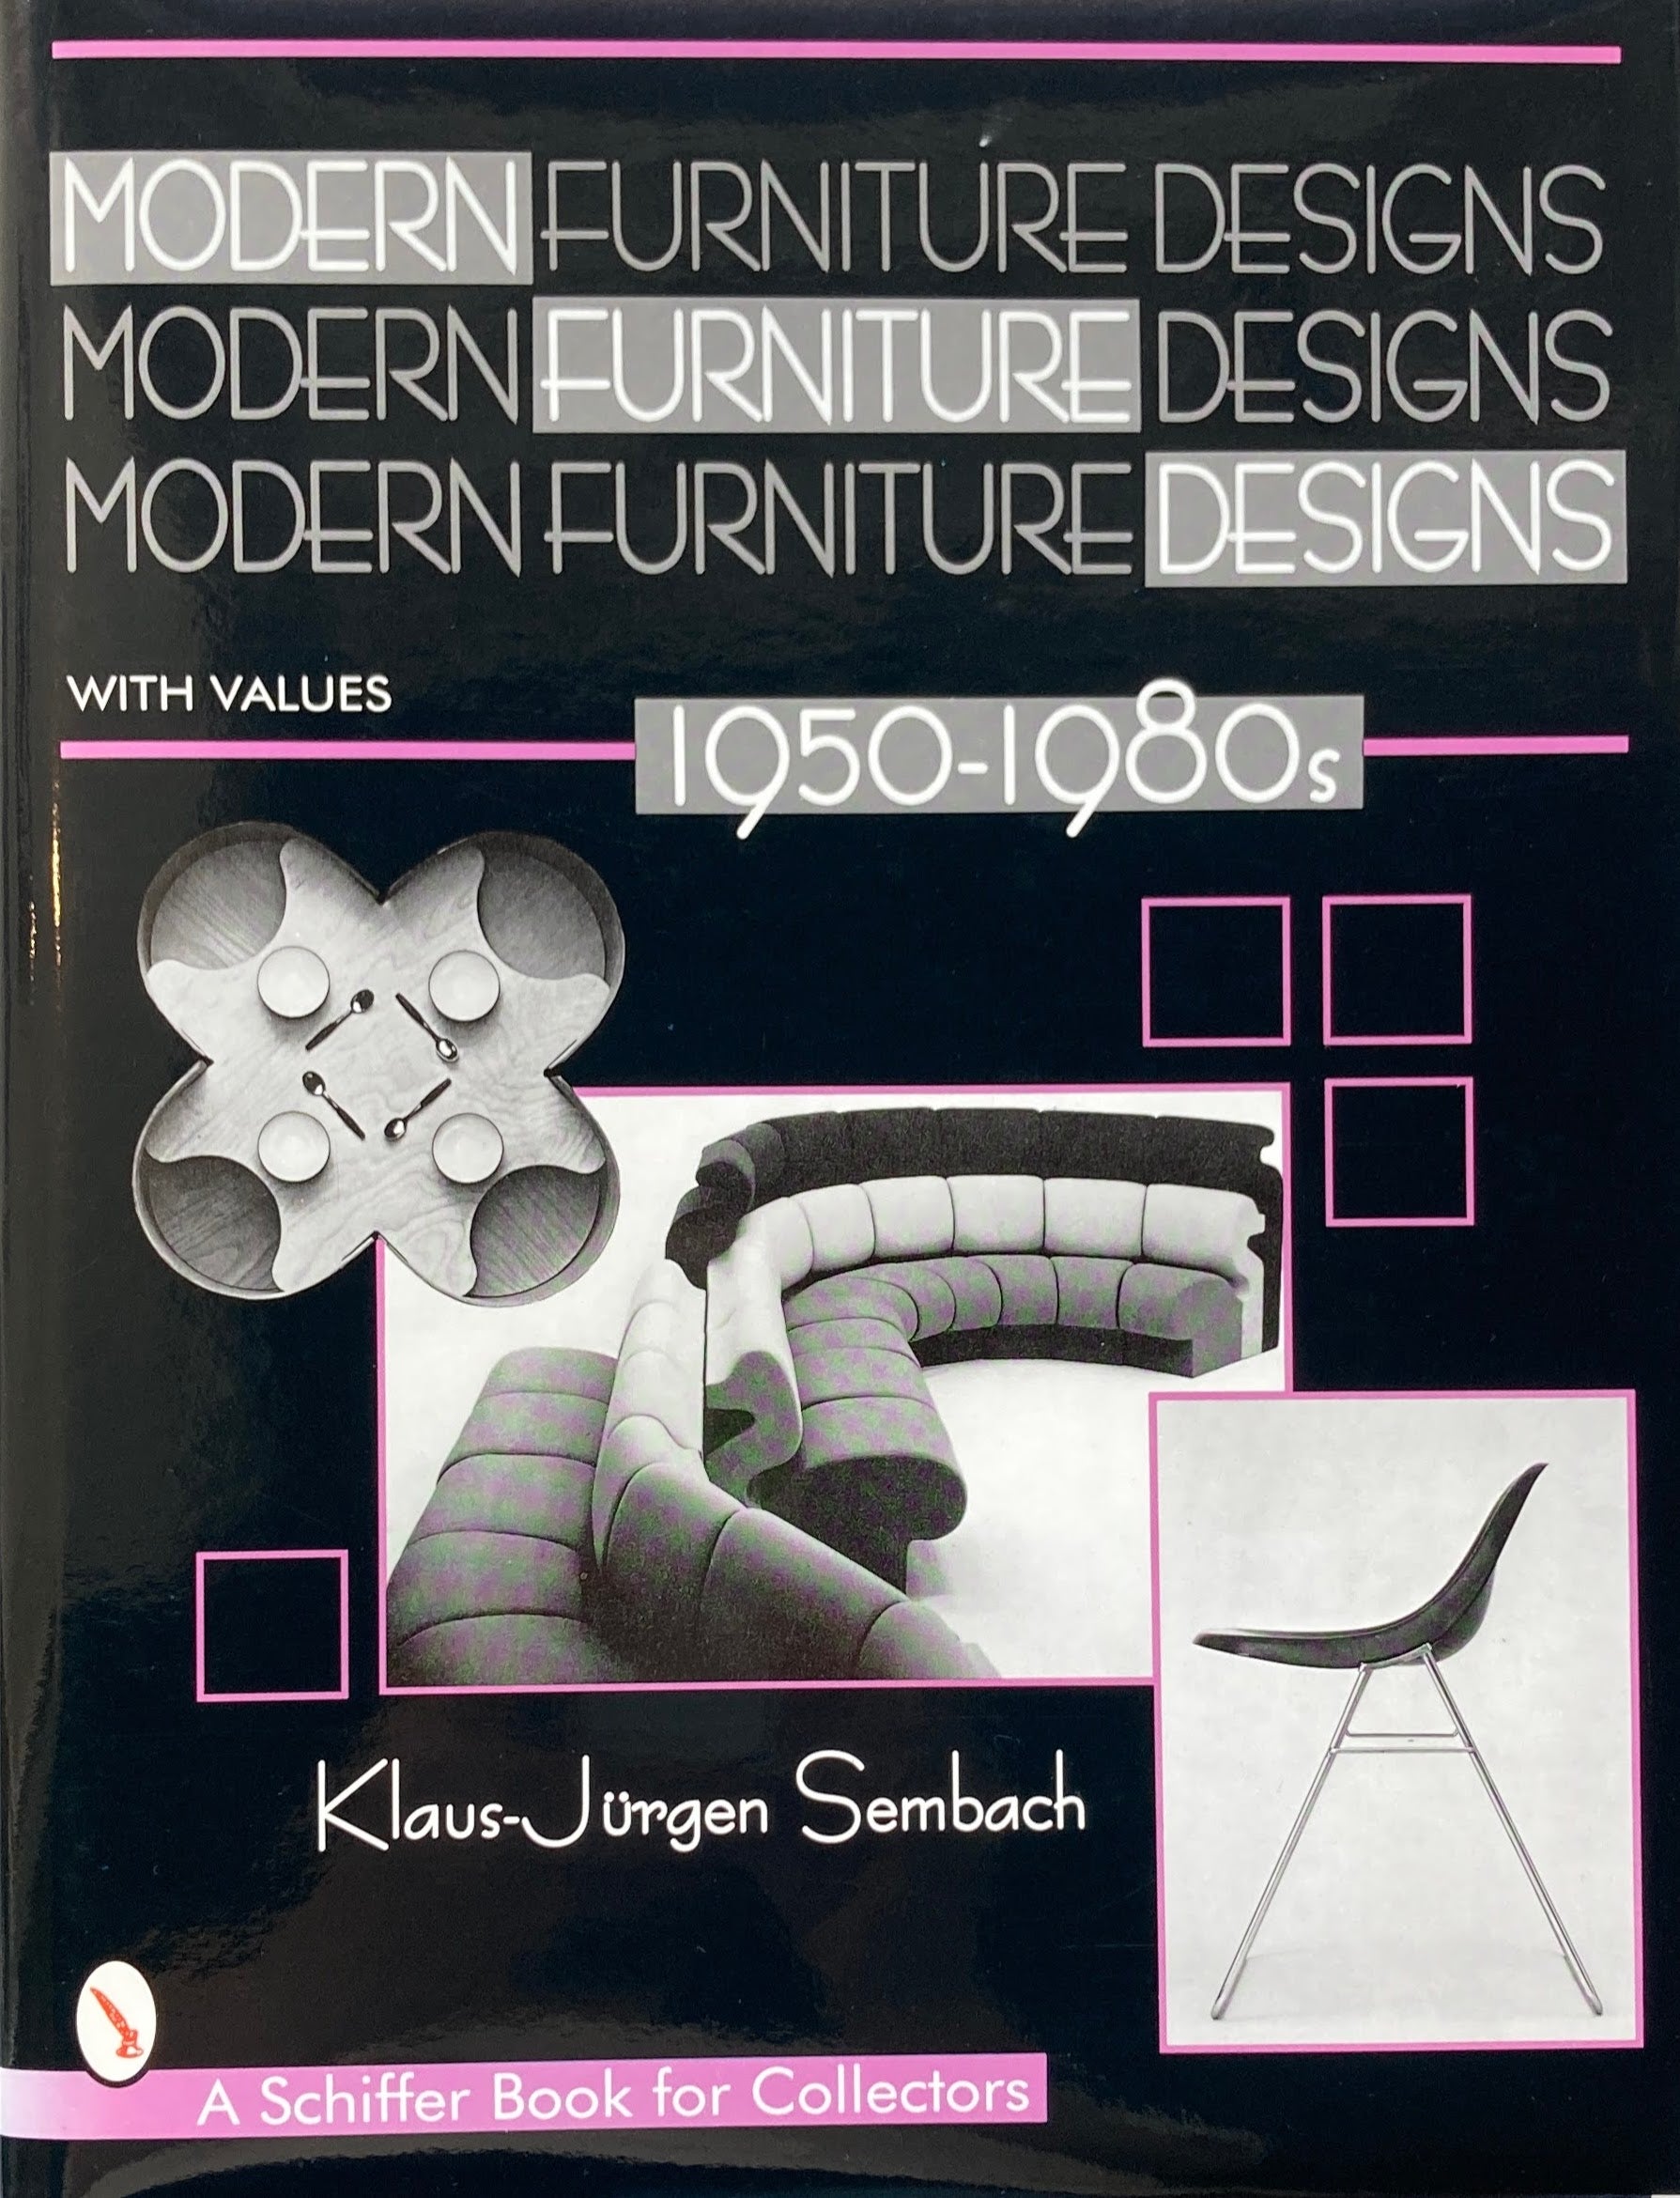 Modern Furniture Designs　1950-1980s　Schiffer Book for Collectors with Values